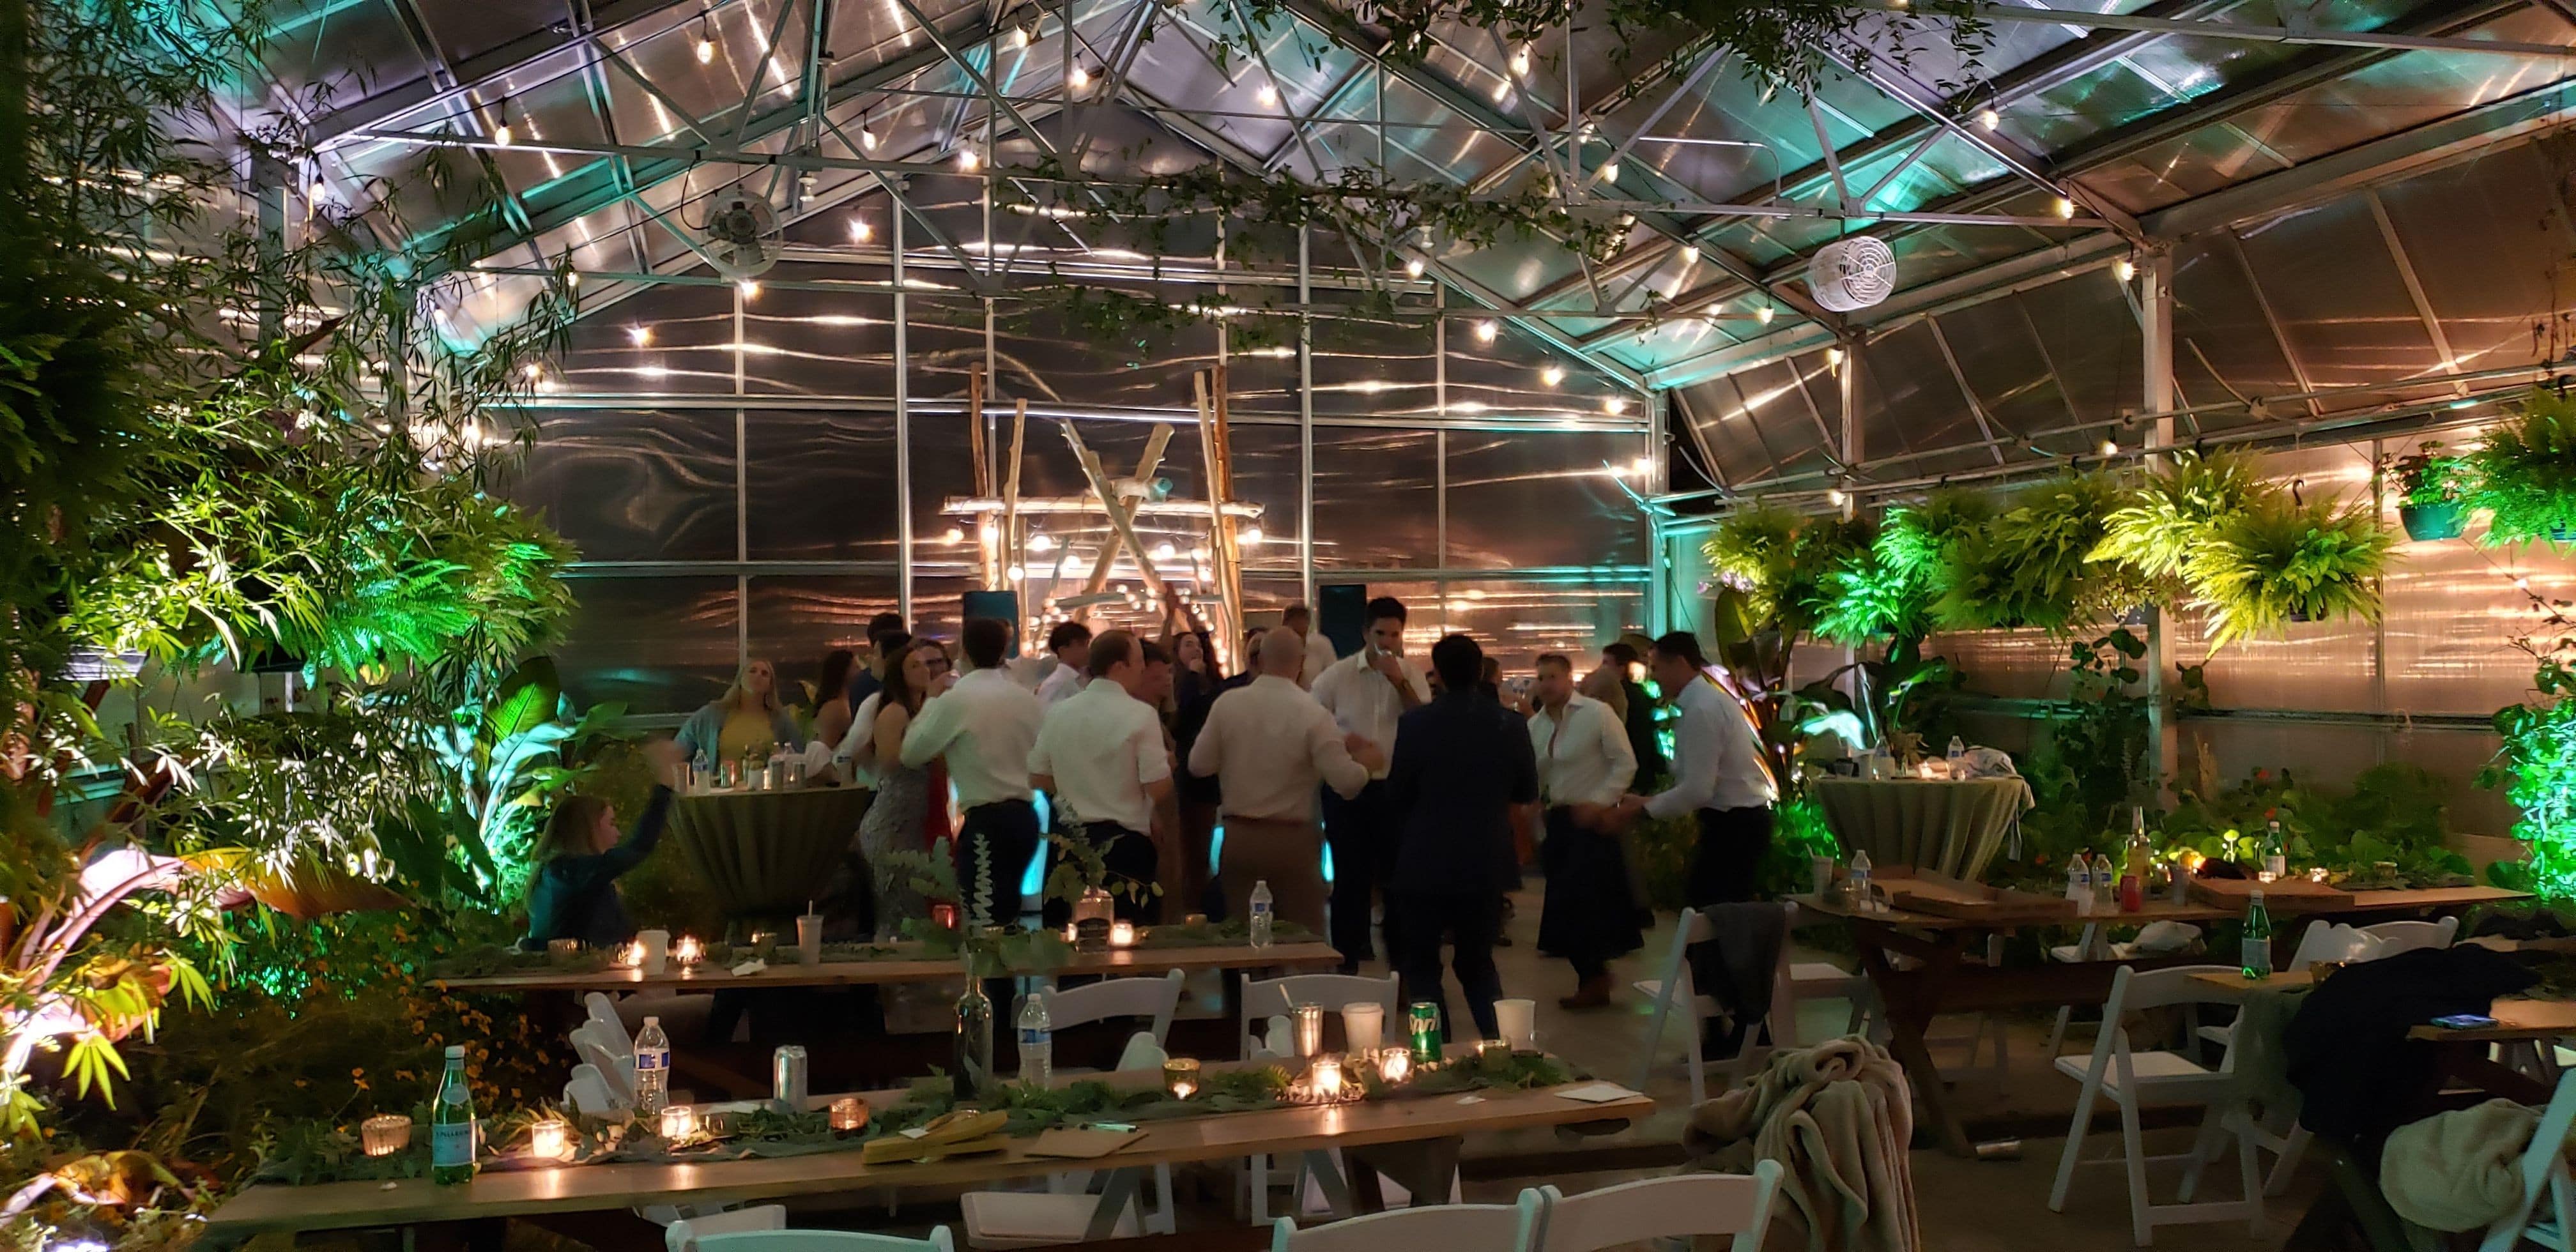 Wedding lighting by Duluth Event Lighting at Sitio Events in the Green house with mint green and soft white up lighting.